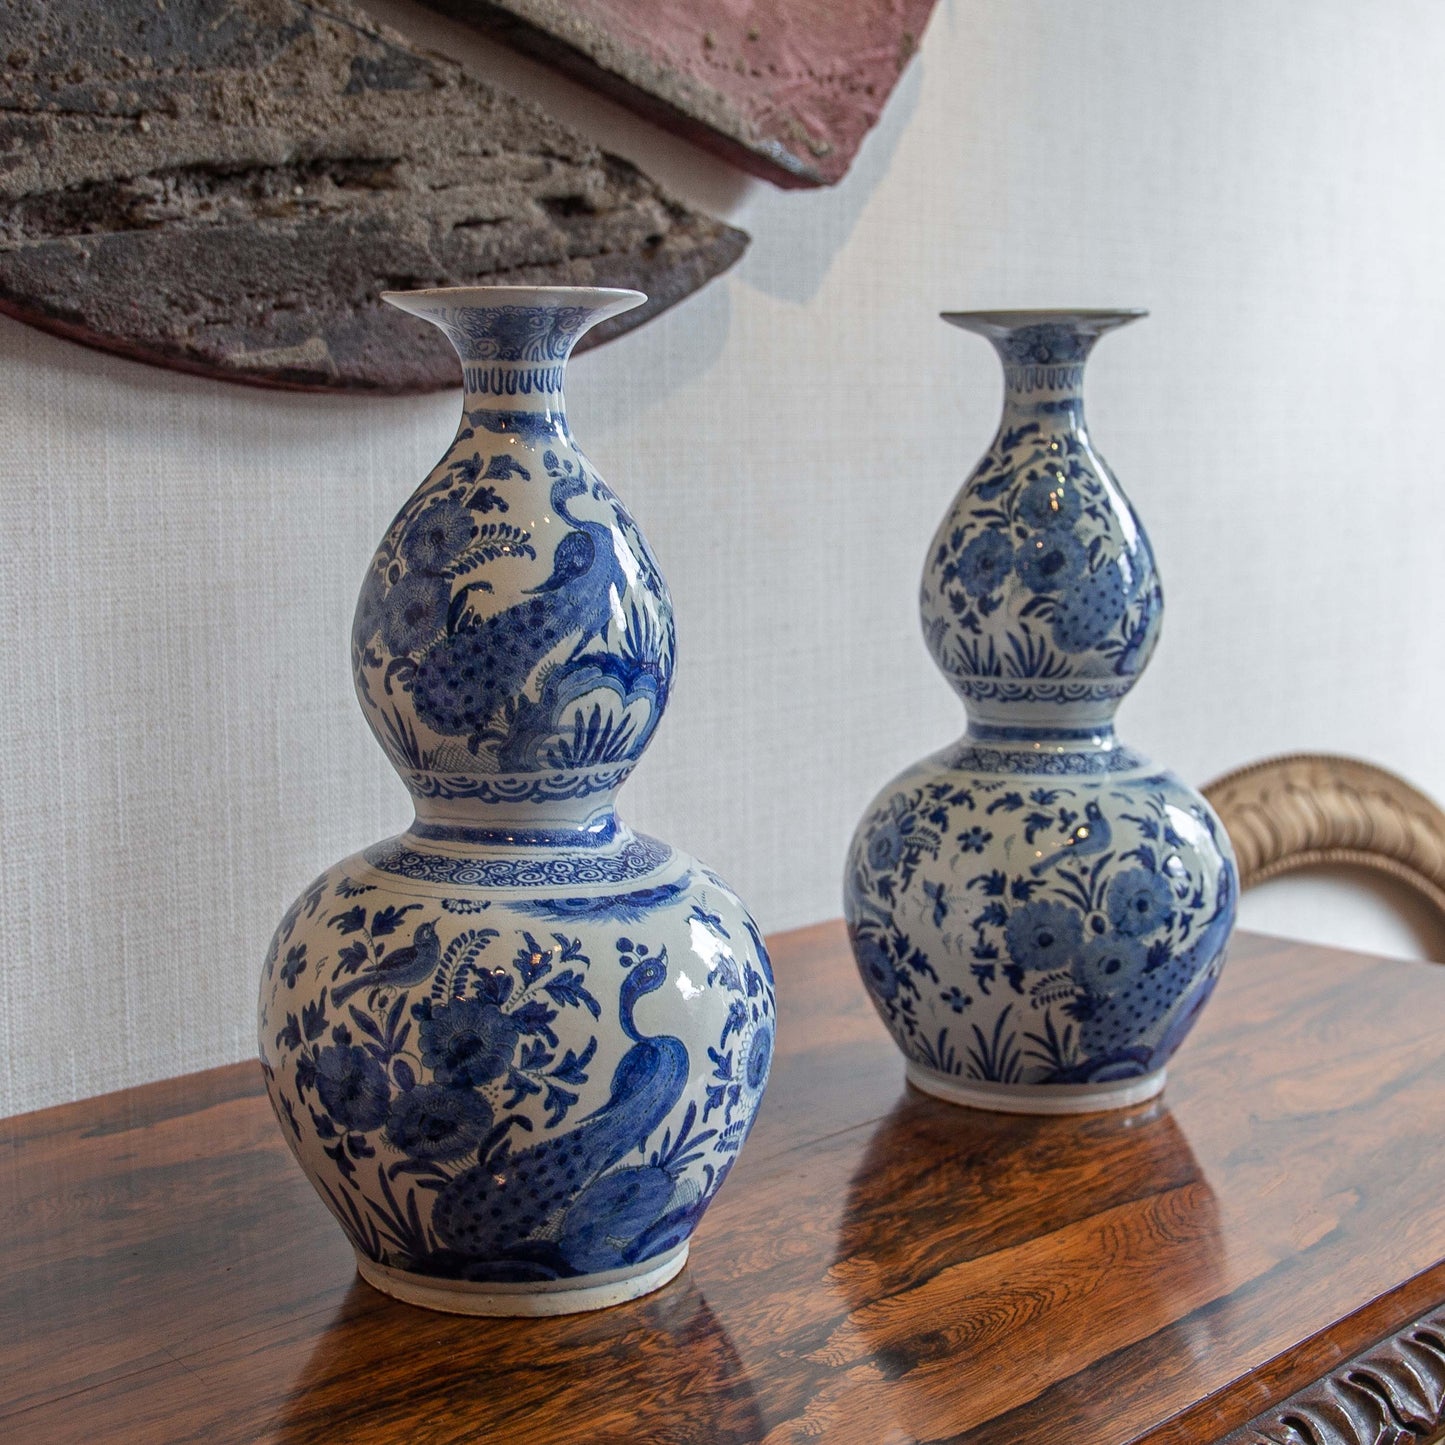 PAIR OF 18TH CENTURY DOUBLE GOURD BLUE AND WHITE DELFT VASES